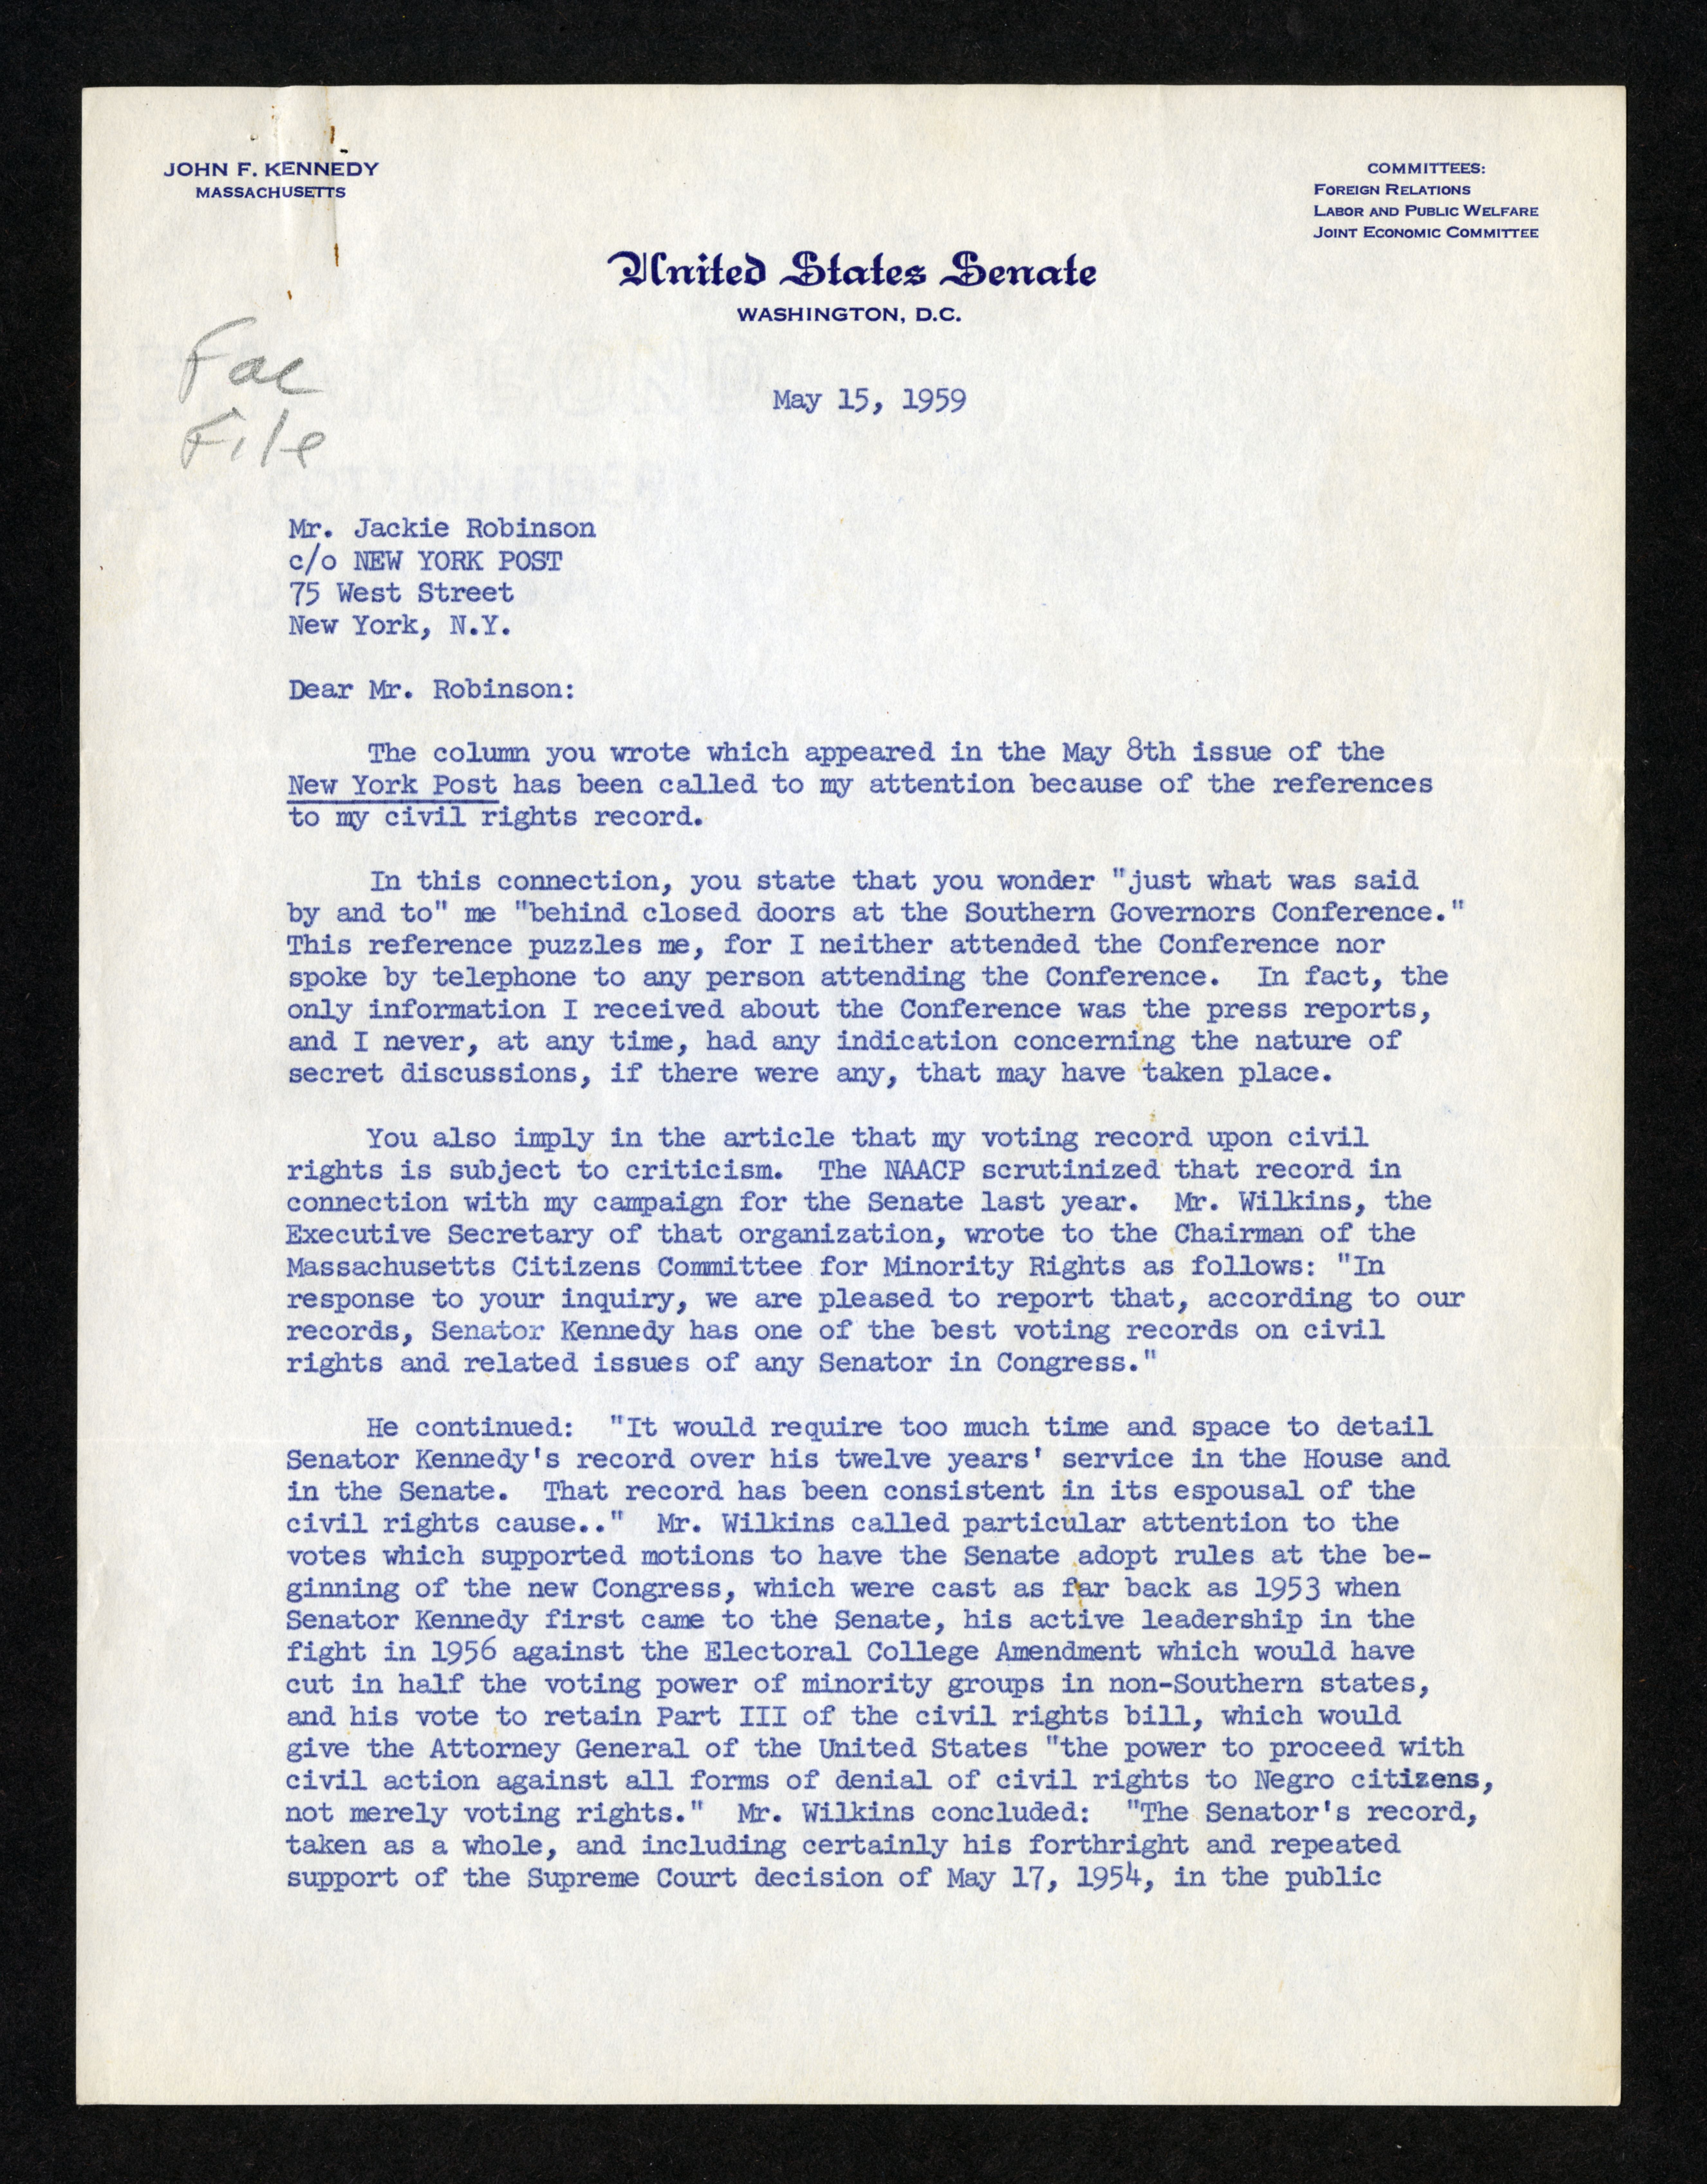 Letter addressed to Jackie Robinson dated May 15, 1959 from John F. Kennedy. (The Gilder Lehrman Collection GLC09754.04)